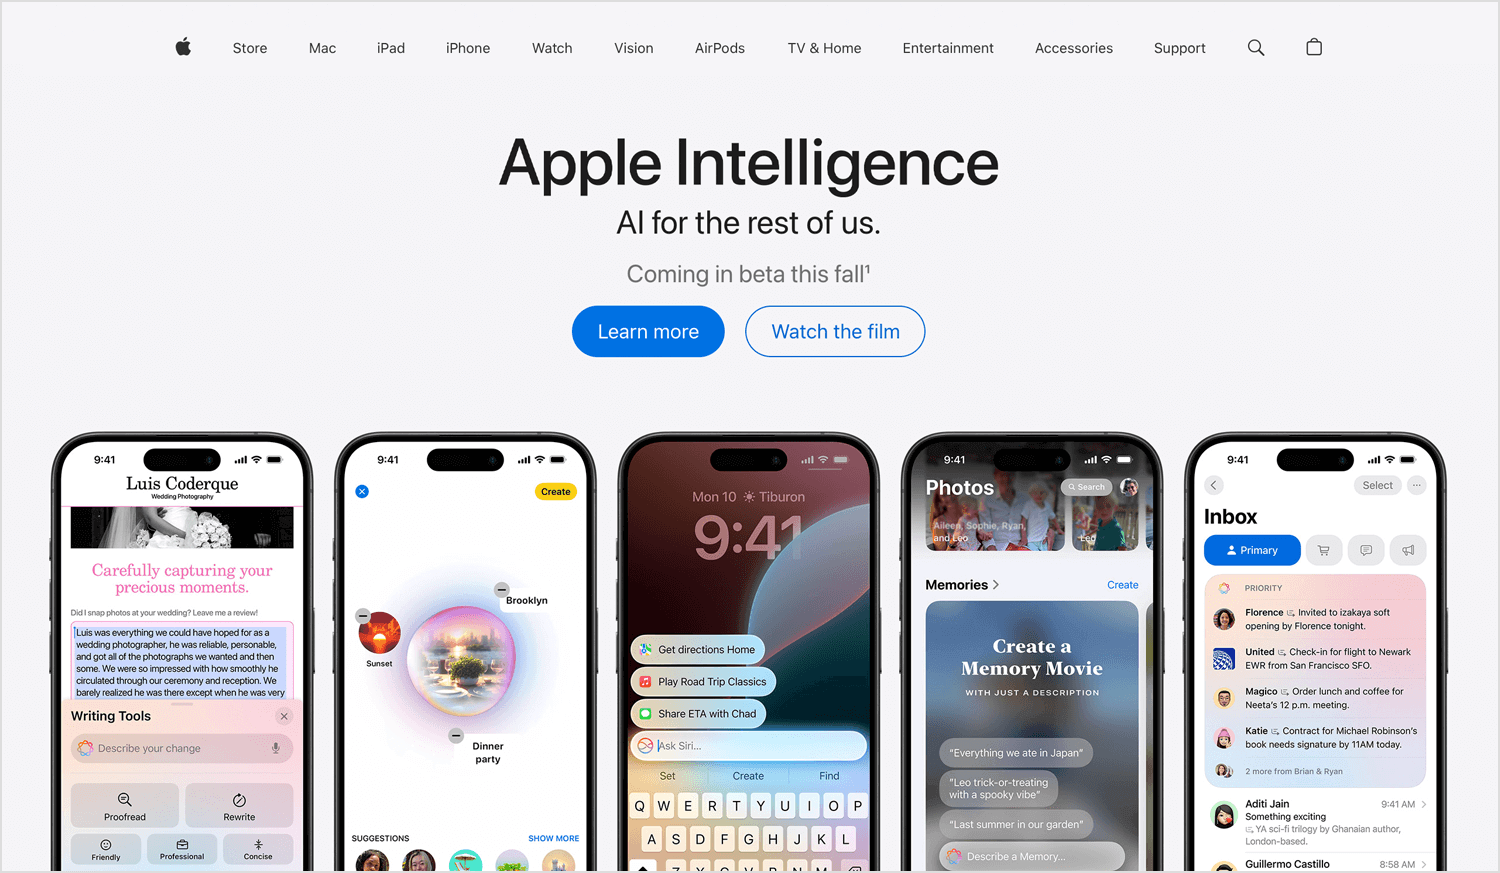 Apple's homepage showcasing iPhones and Apple Intelligence AI